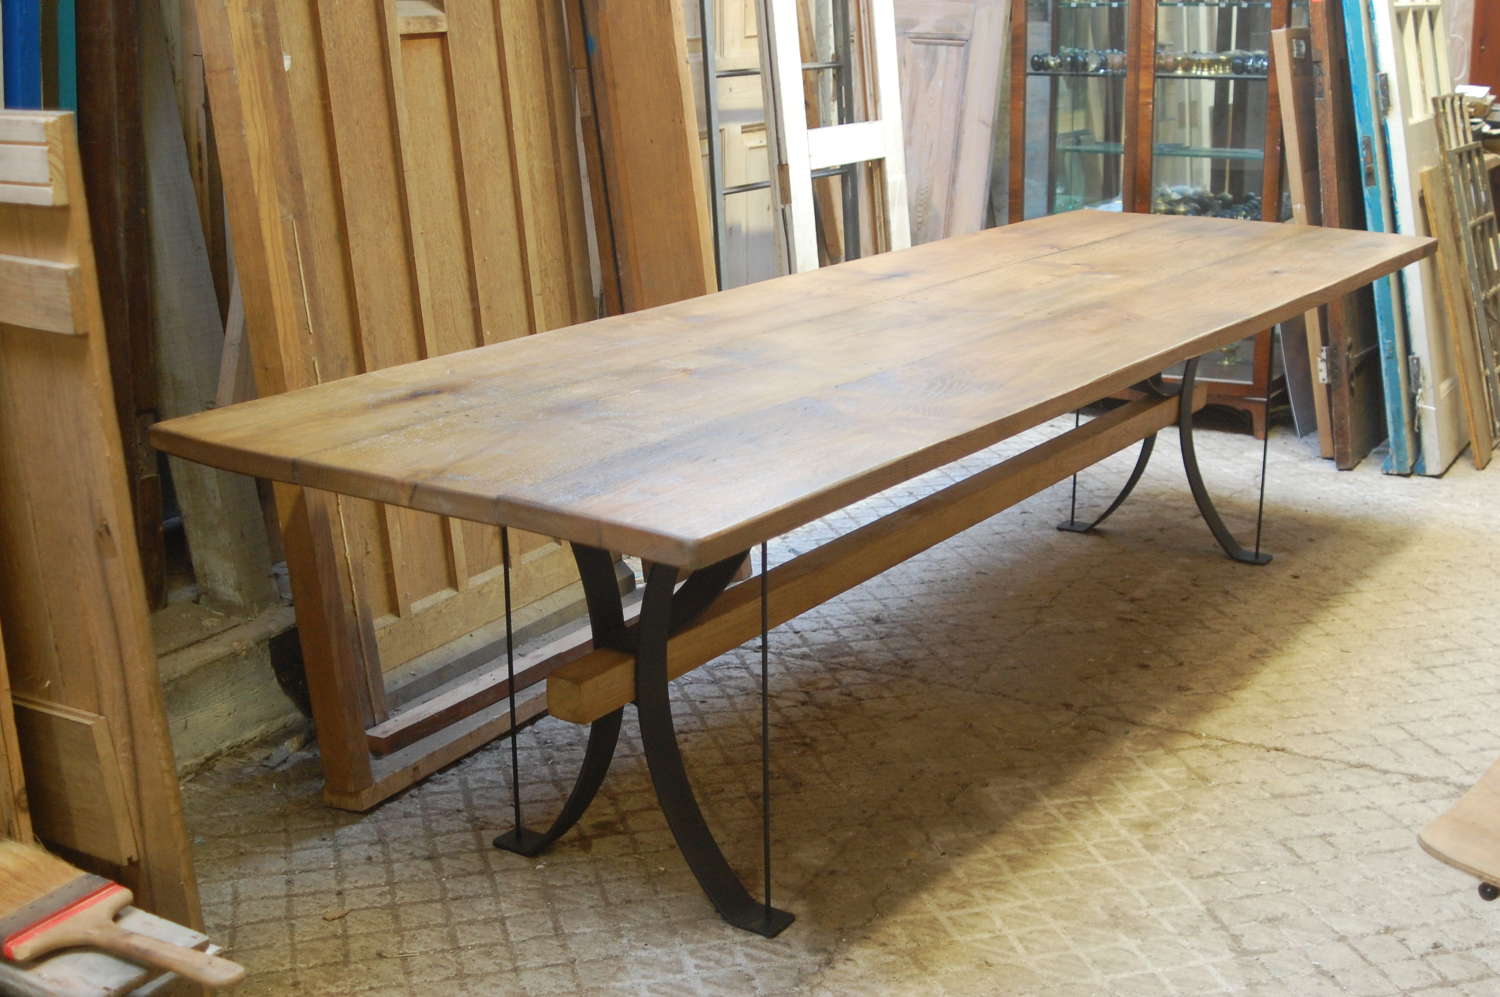 M1558 A BEAUTIFUL RECLAIMED OAK PLANK AND STEEL 10 SEATER TABLE